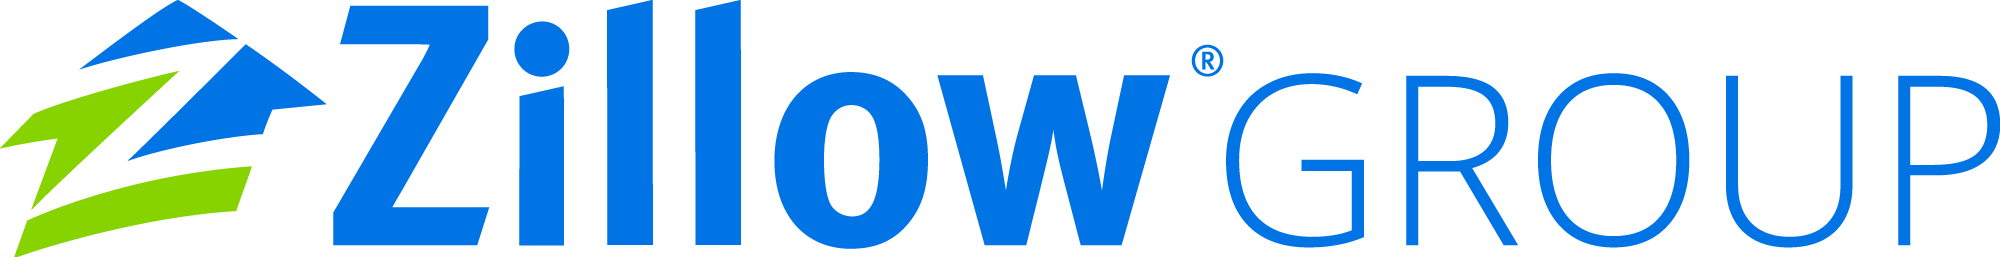 ZILLOW GROUP 